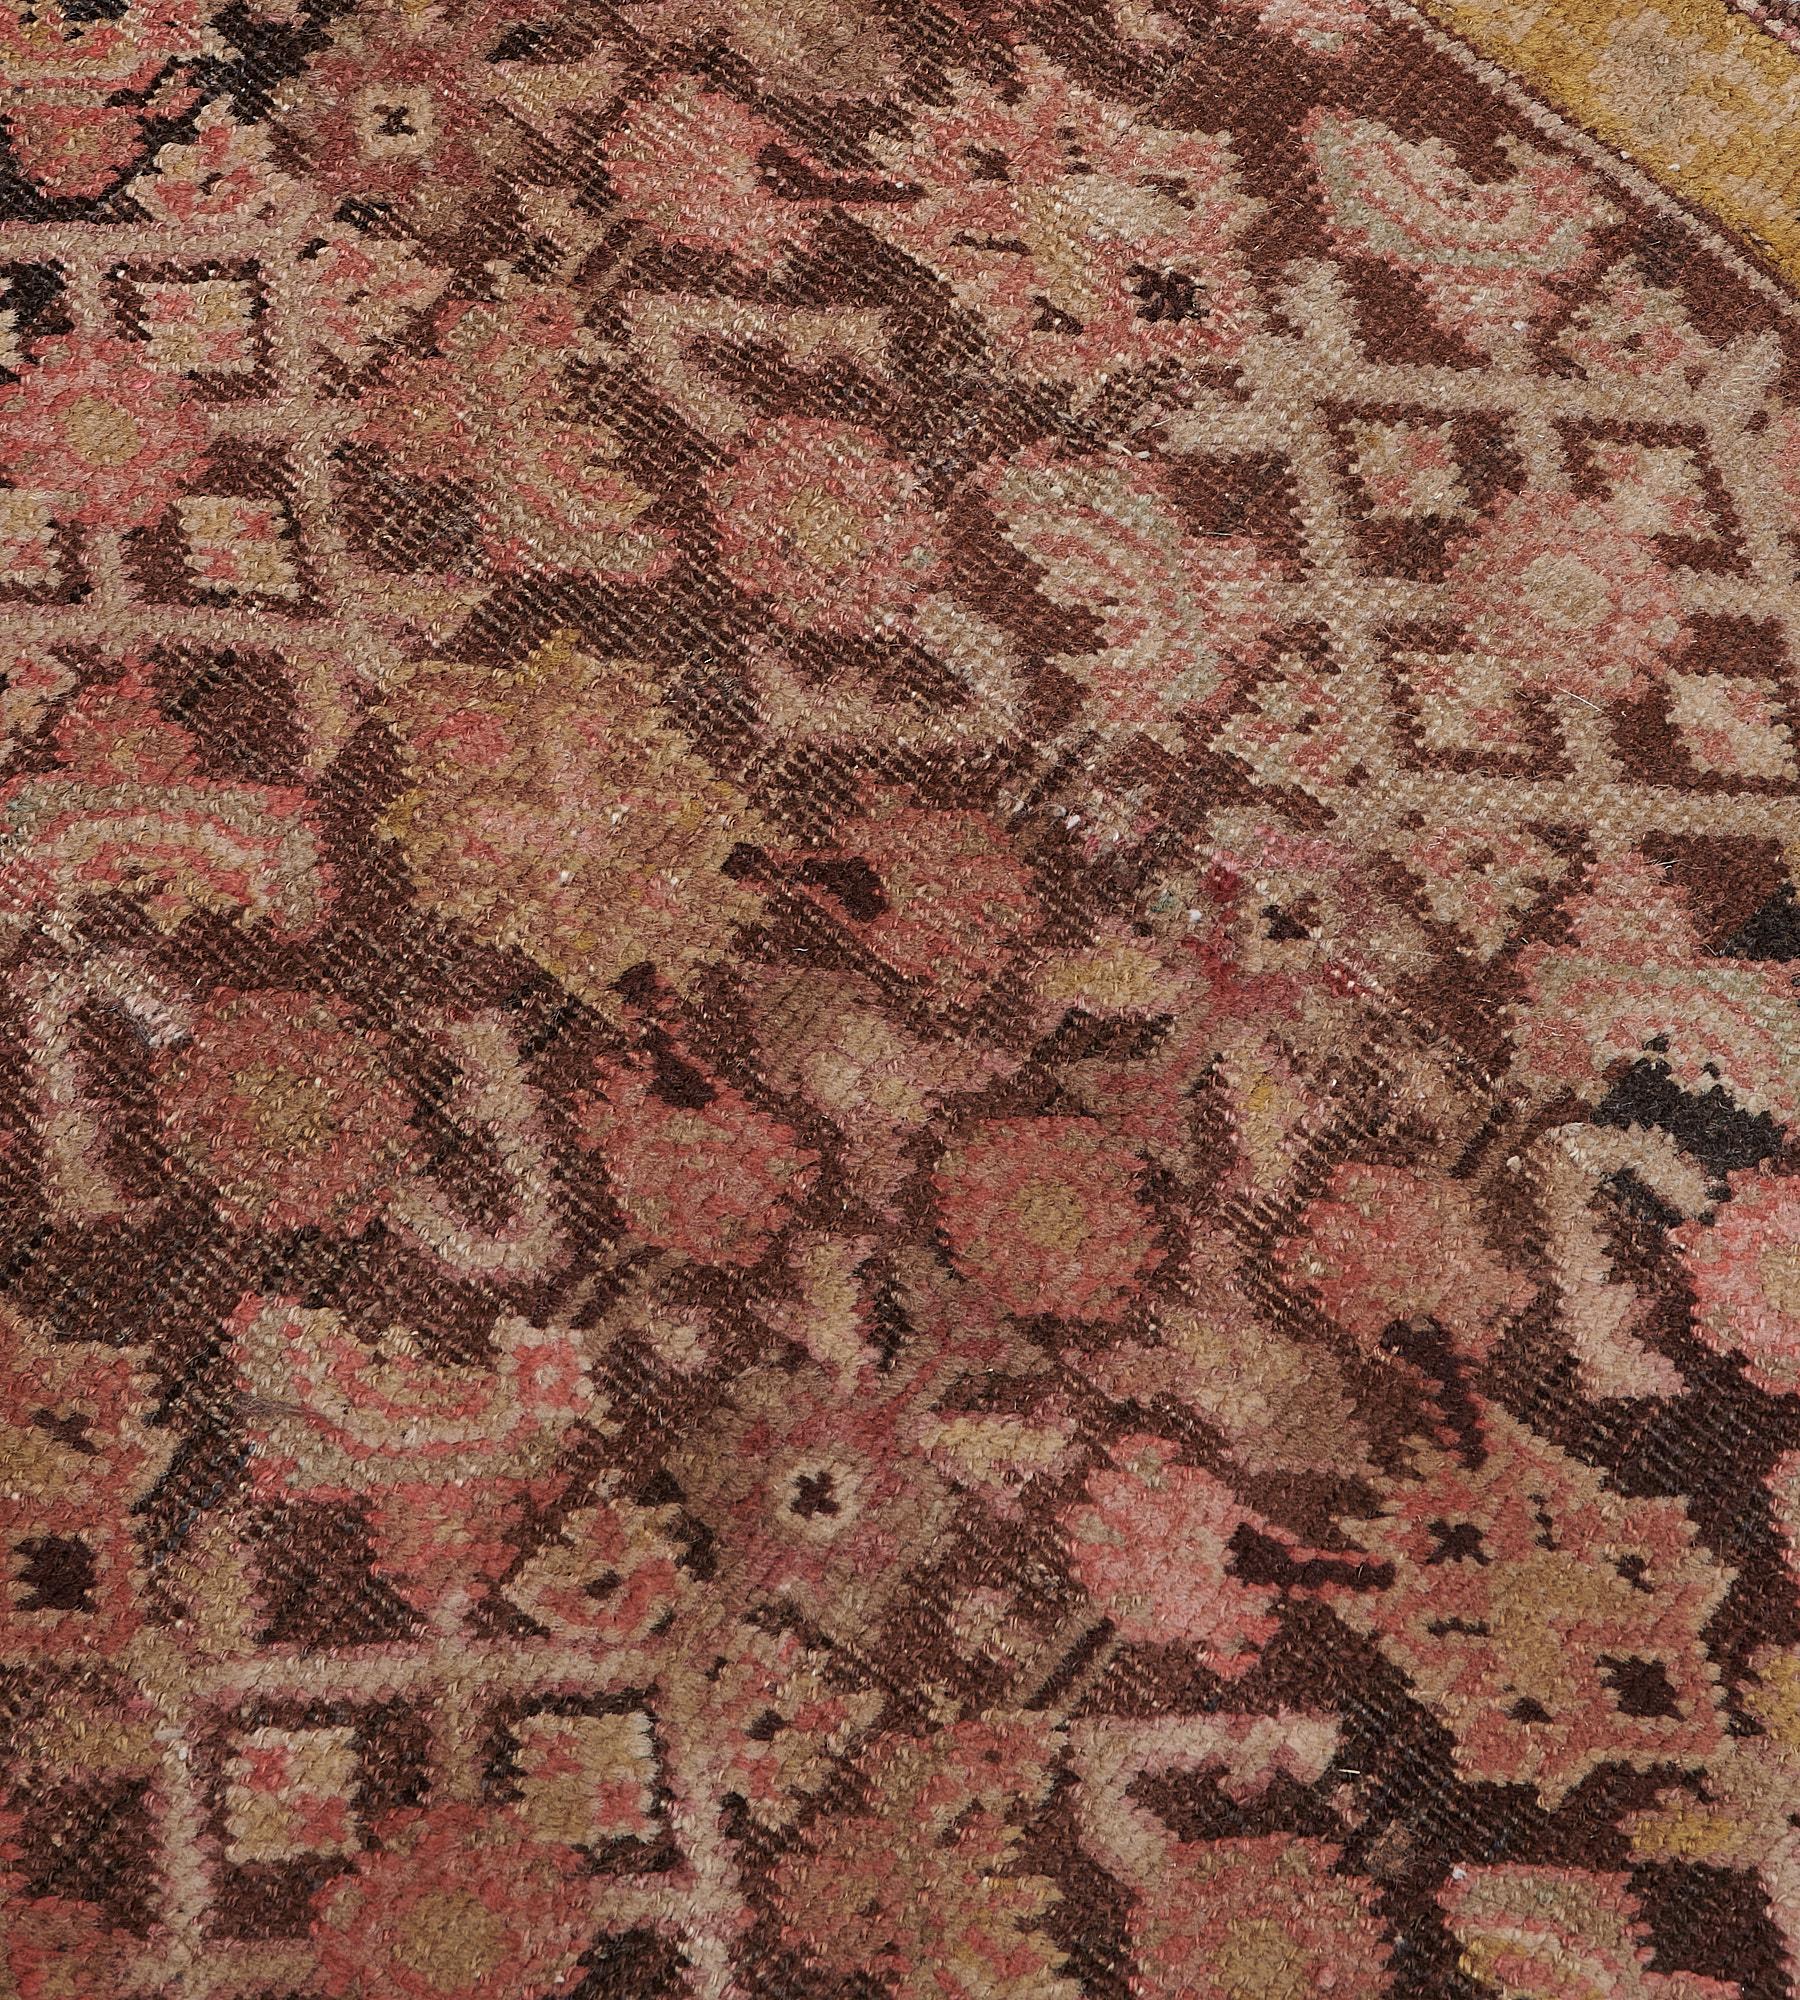 Late 19th Century Chocolate-Brown Antique Karabagh Runner In Good Condition For Sale In West Hollywood, CA